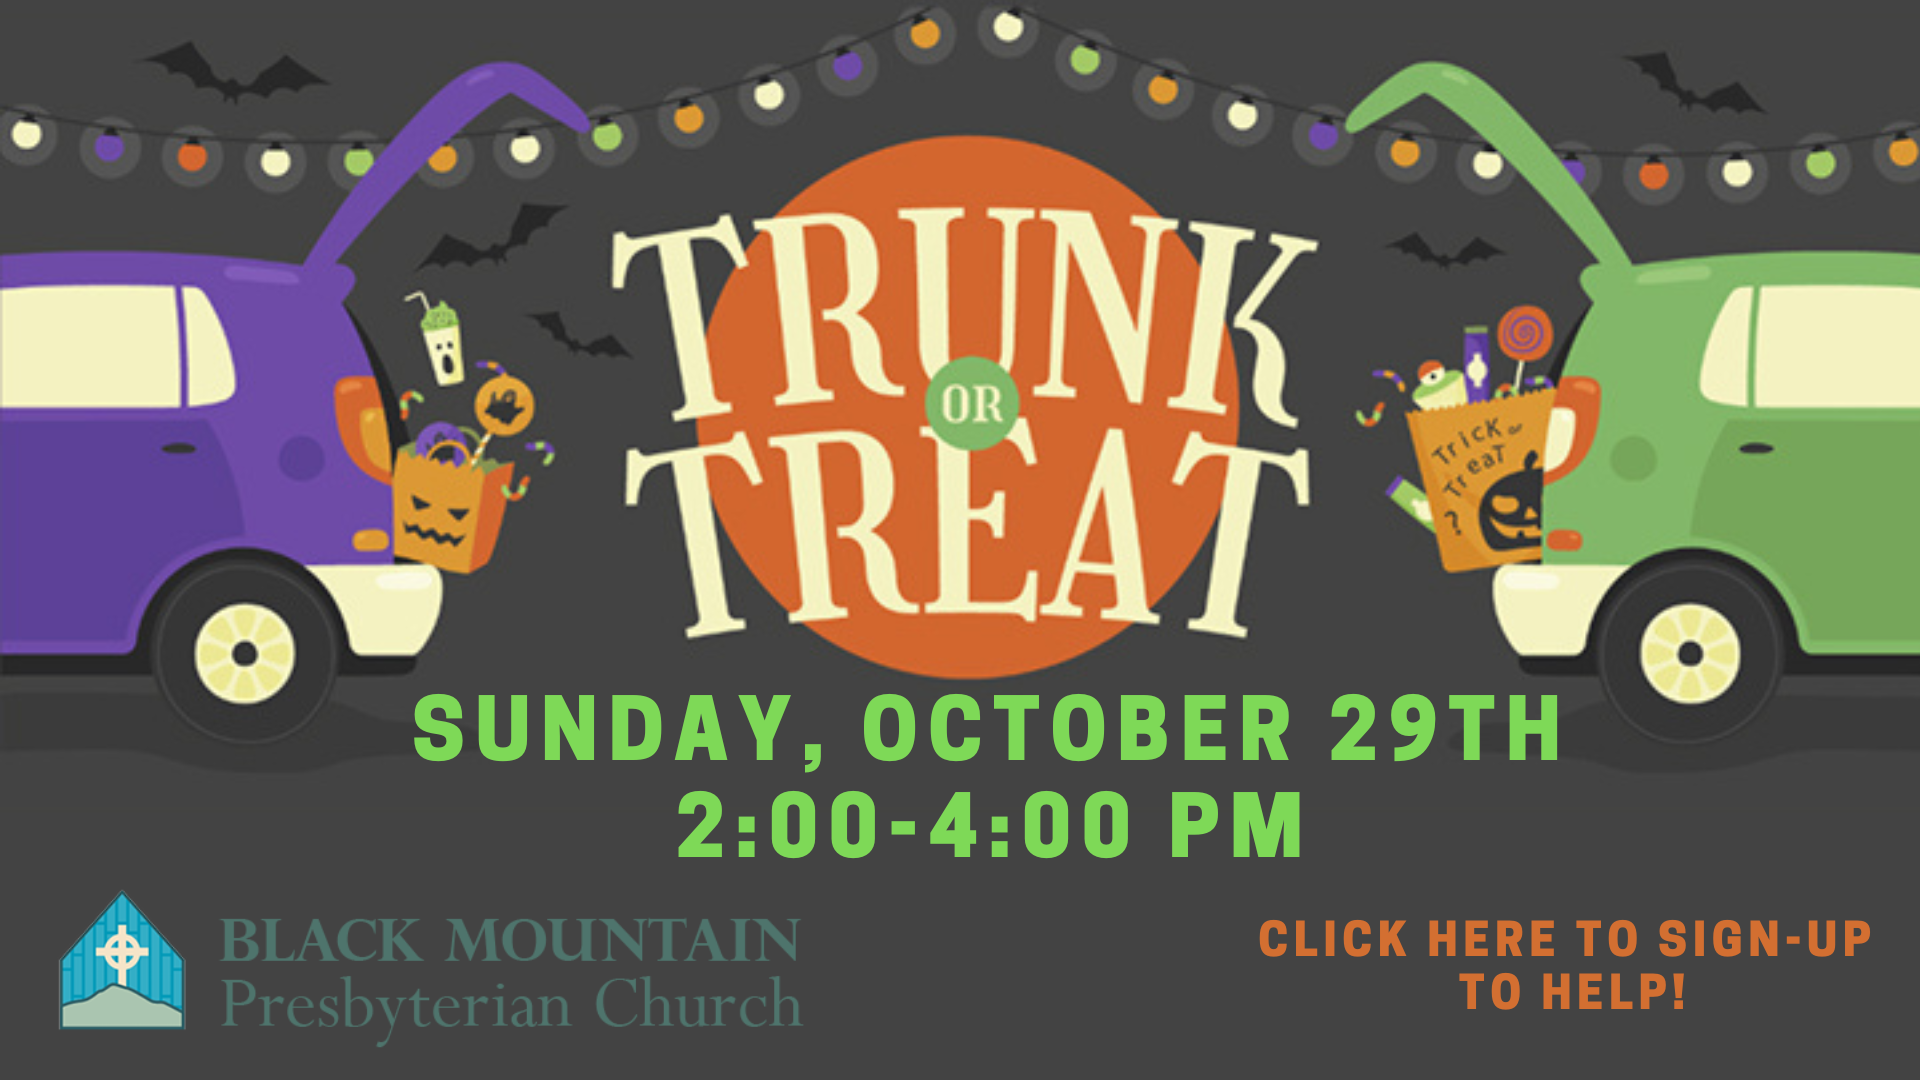 TrunkorTreat.Website (1920 x 1080 px) (1).png